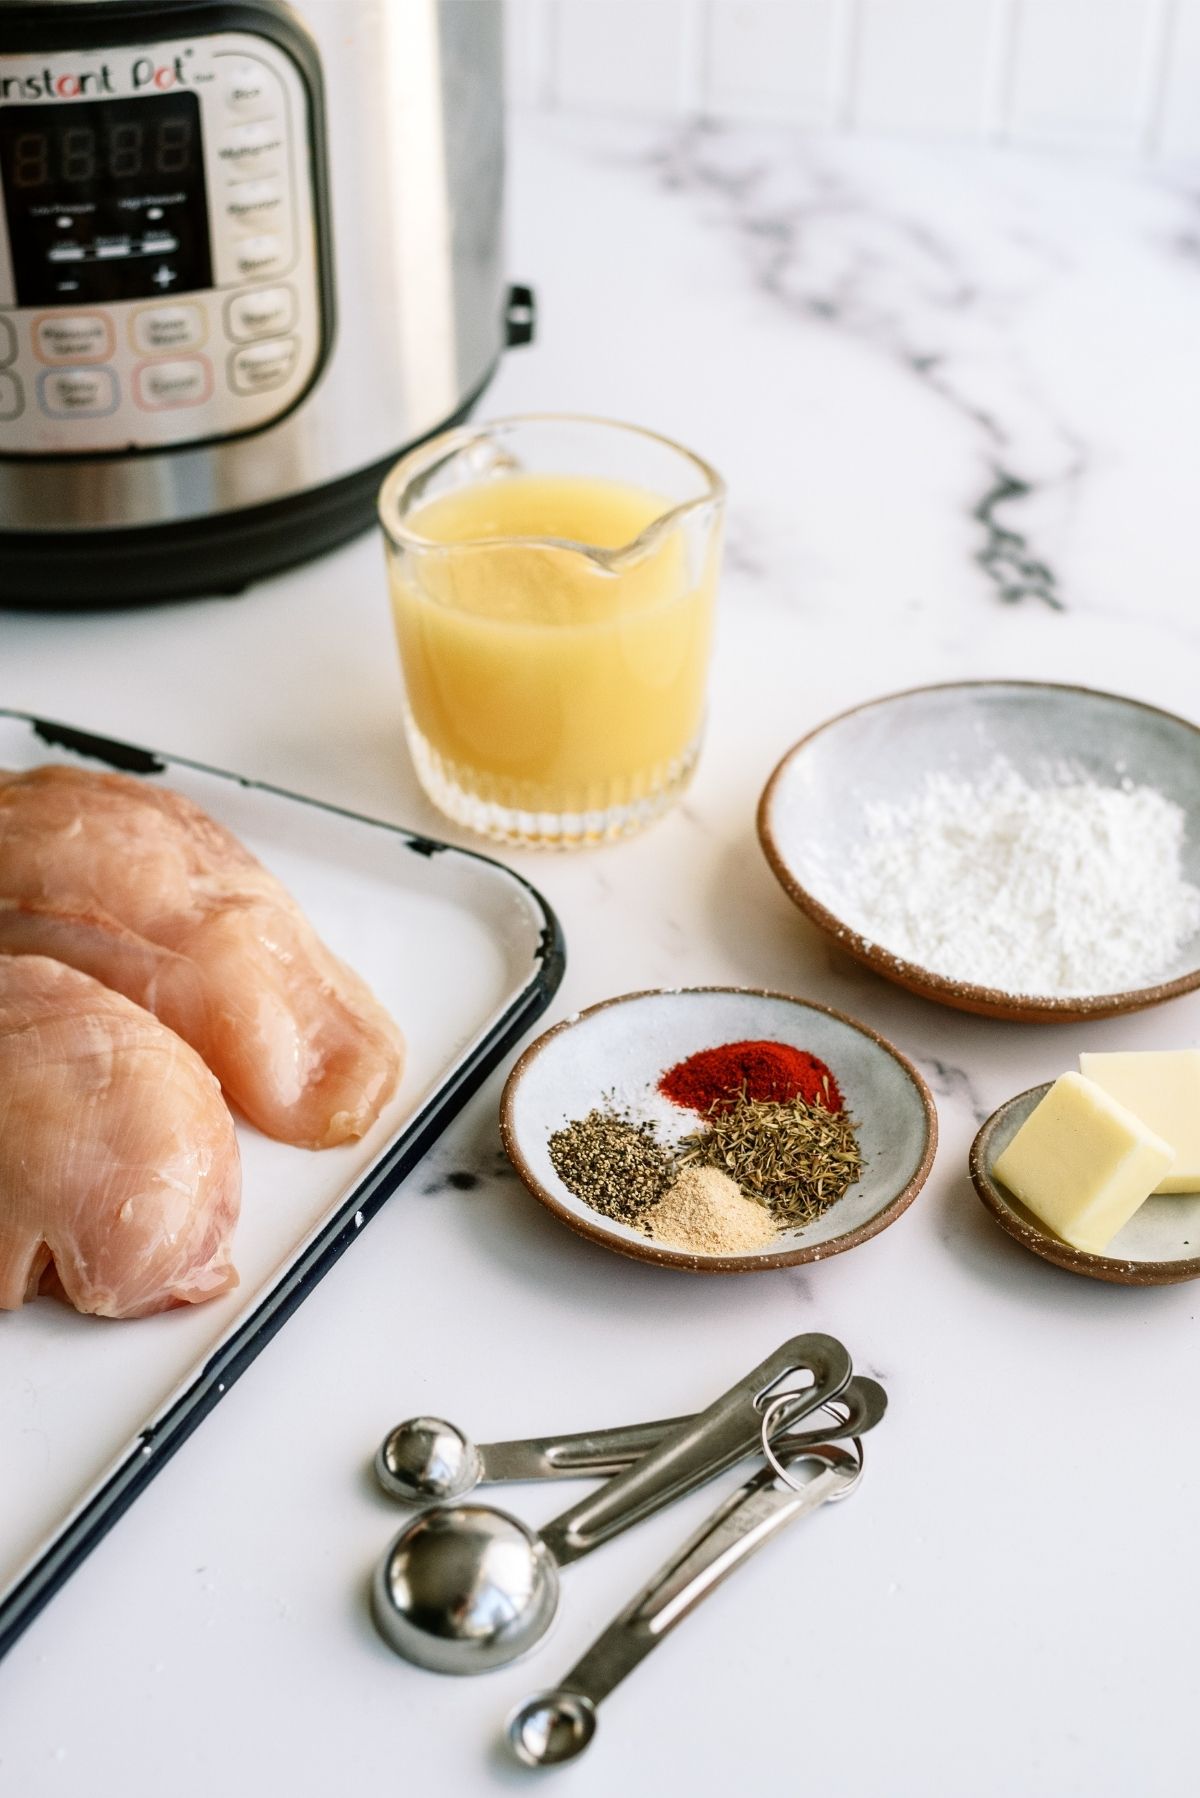 Ingredients for Instant Pot Chicken and Gravy